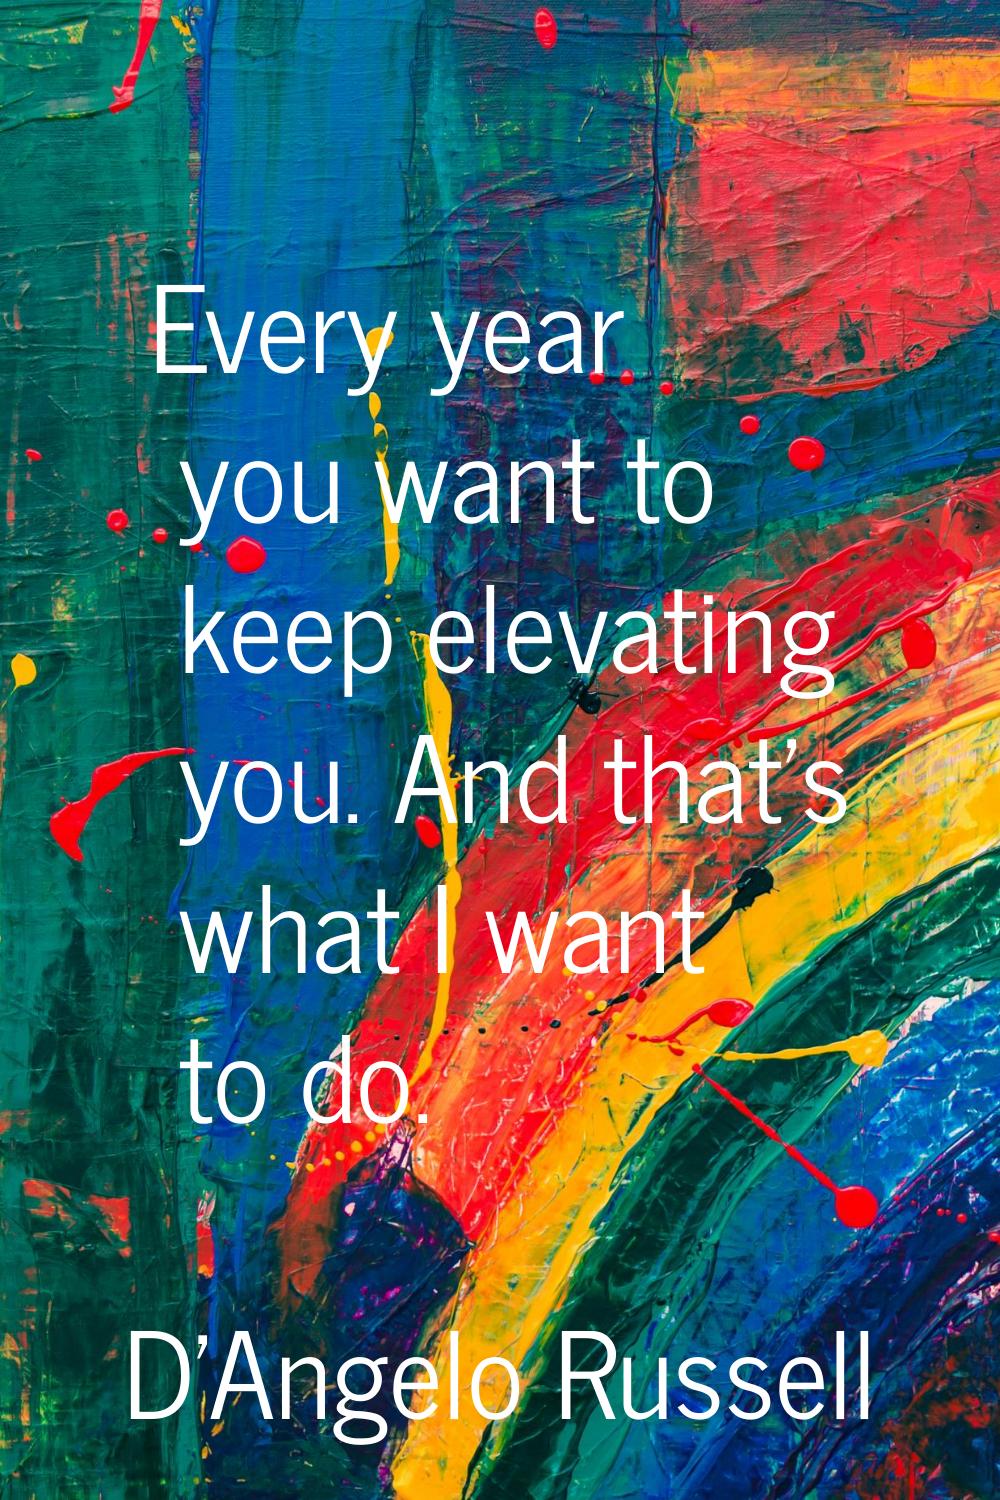 Every year you want to keep elevating you. And that's what I want to do.